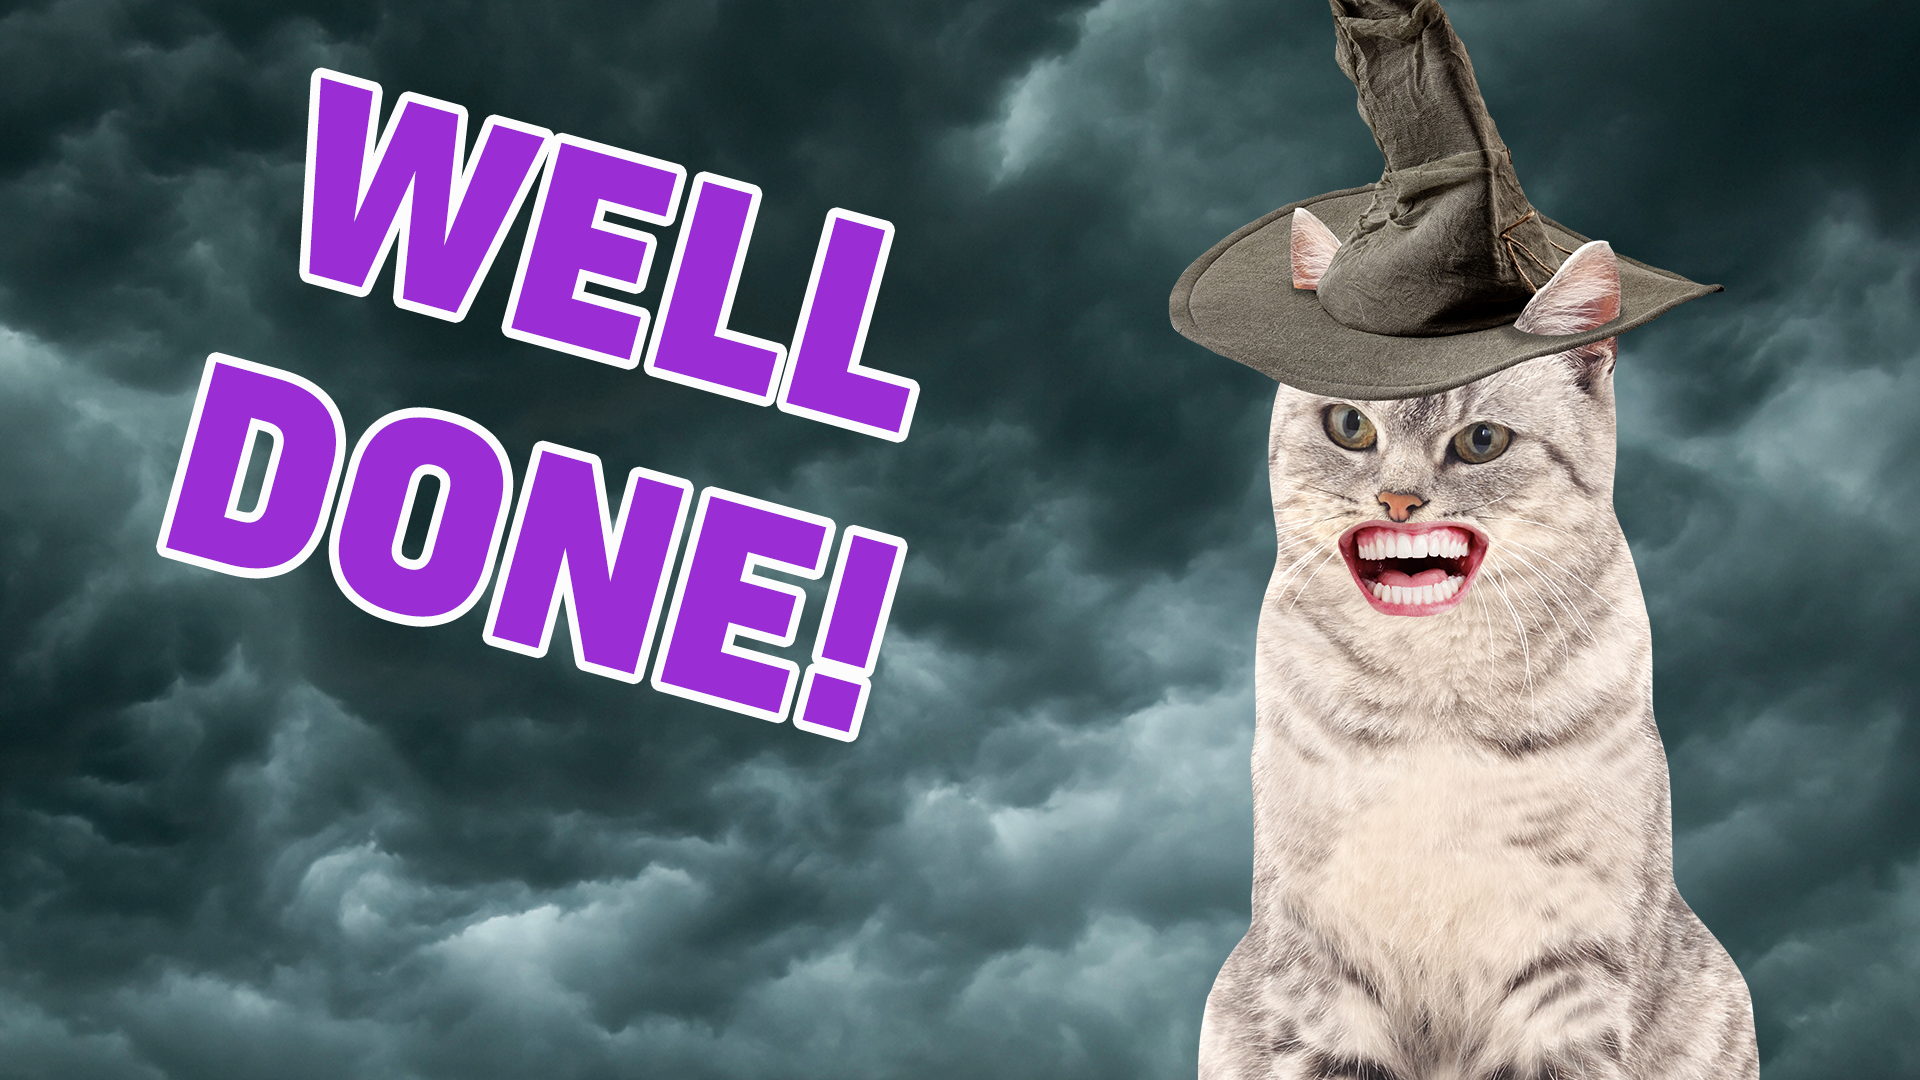 Good job! We can tell you're a bit of a Potterhead - but can you get 100% next time?